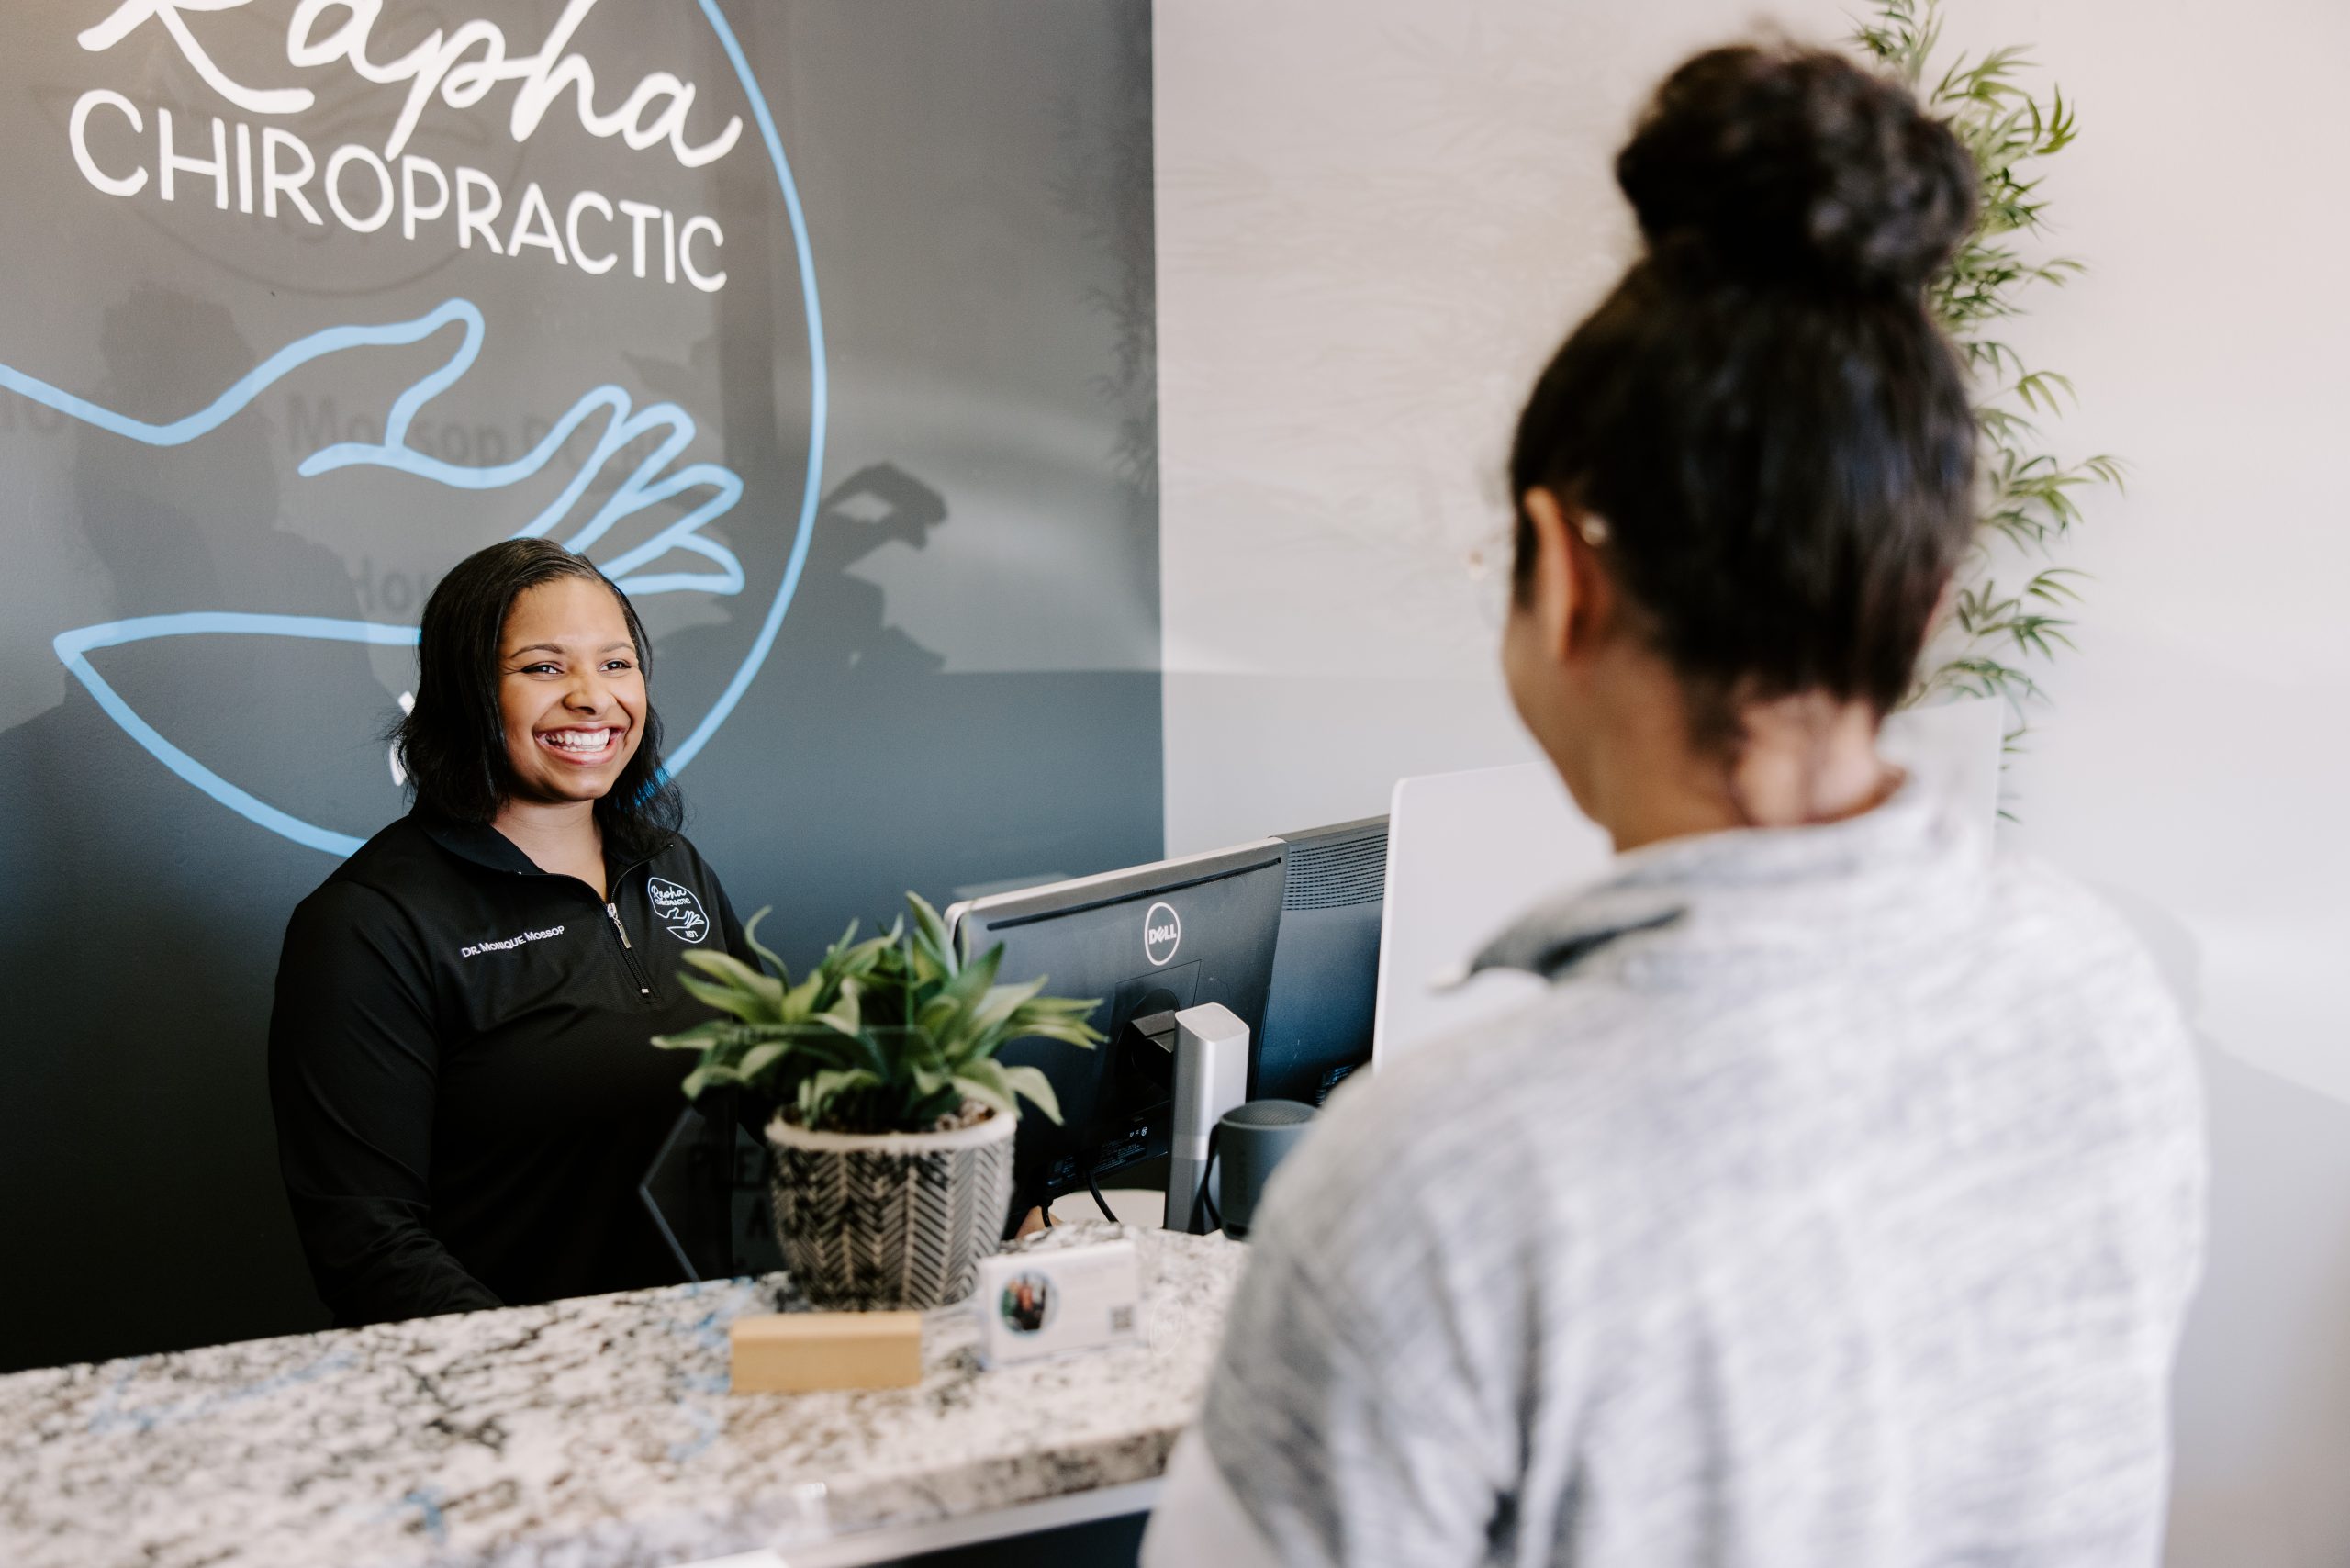 Dr. Monique Mossop opens new chiropractic office in Tulsa